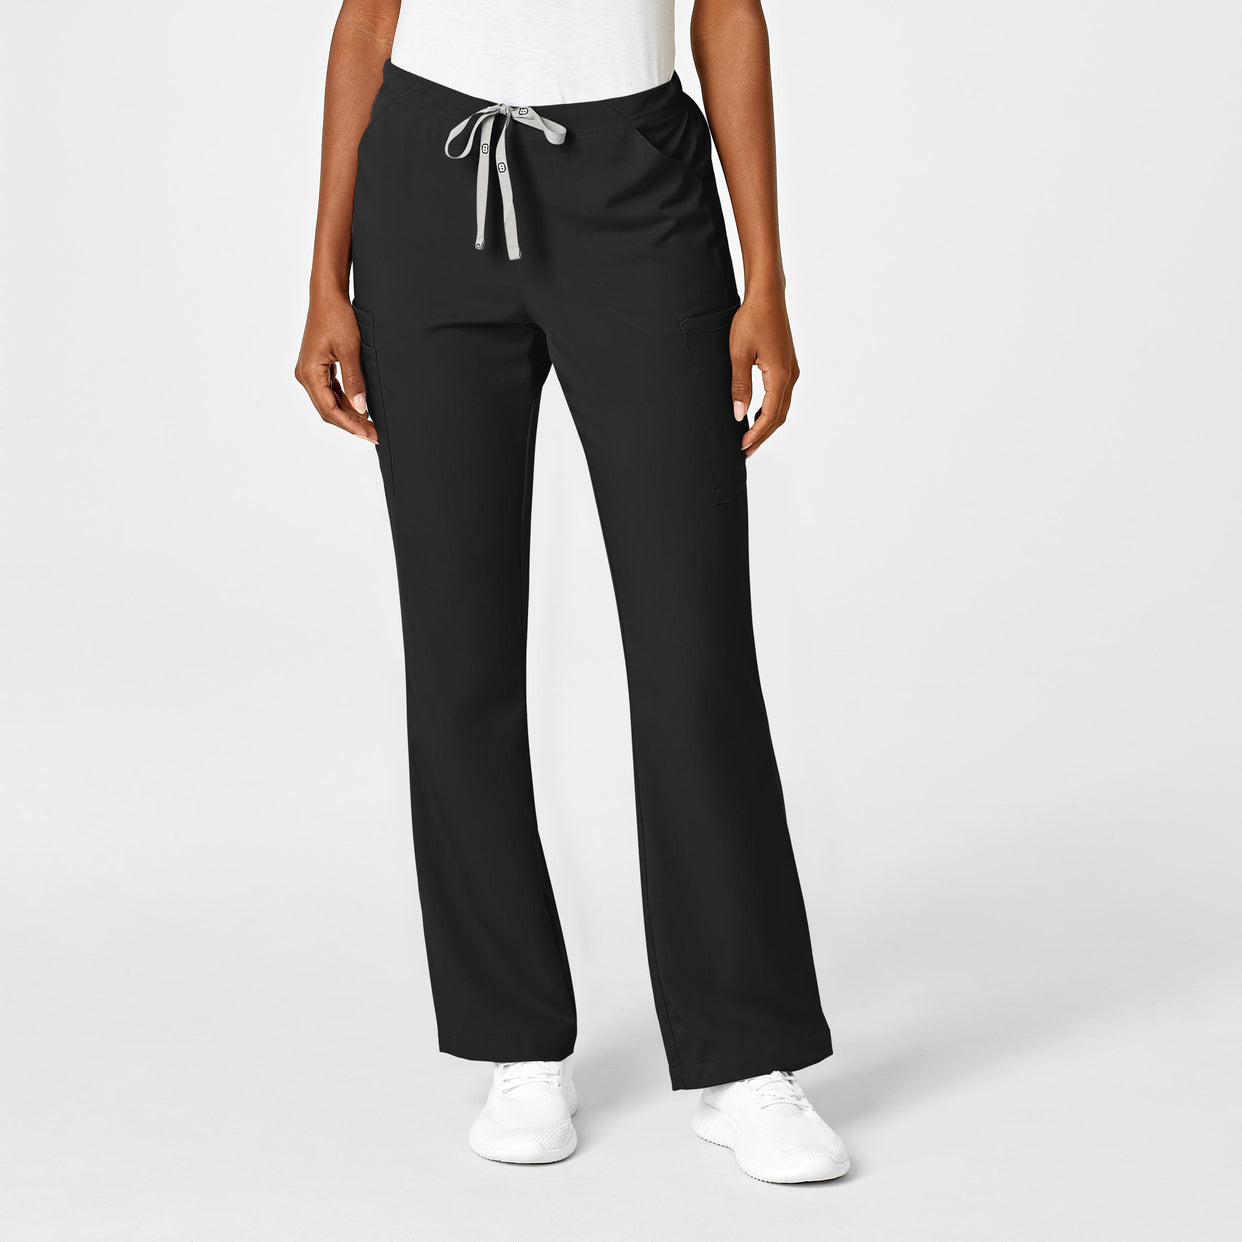 Thursday's Workwear Report: Miracle Flawless Flare-Leg Pant